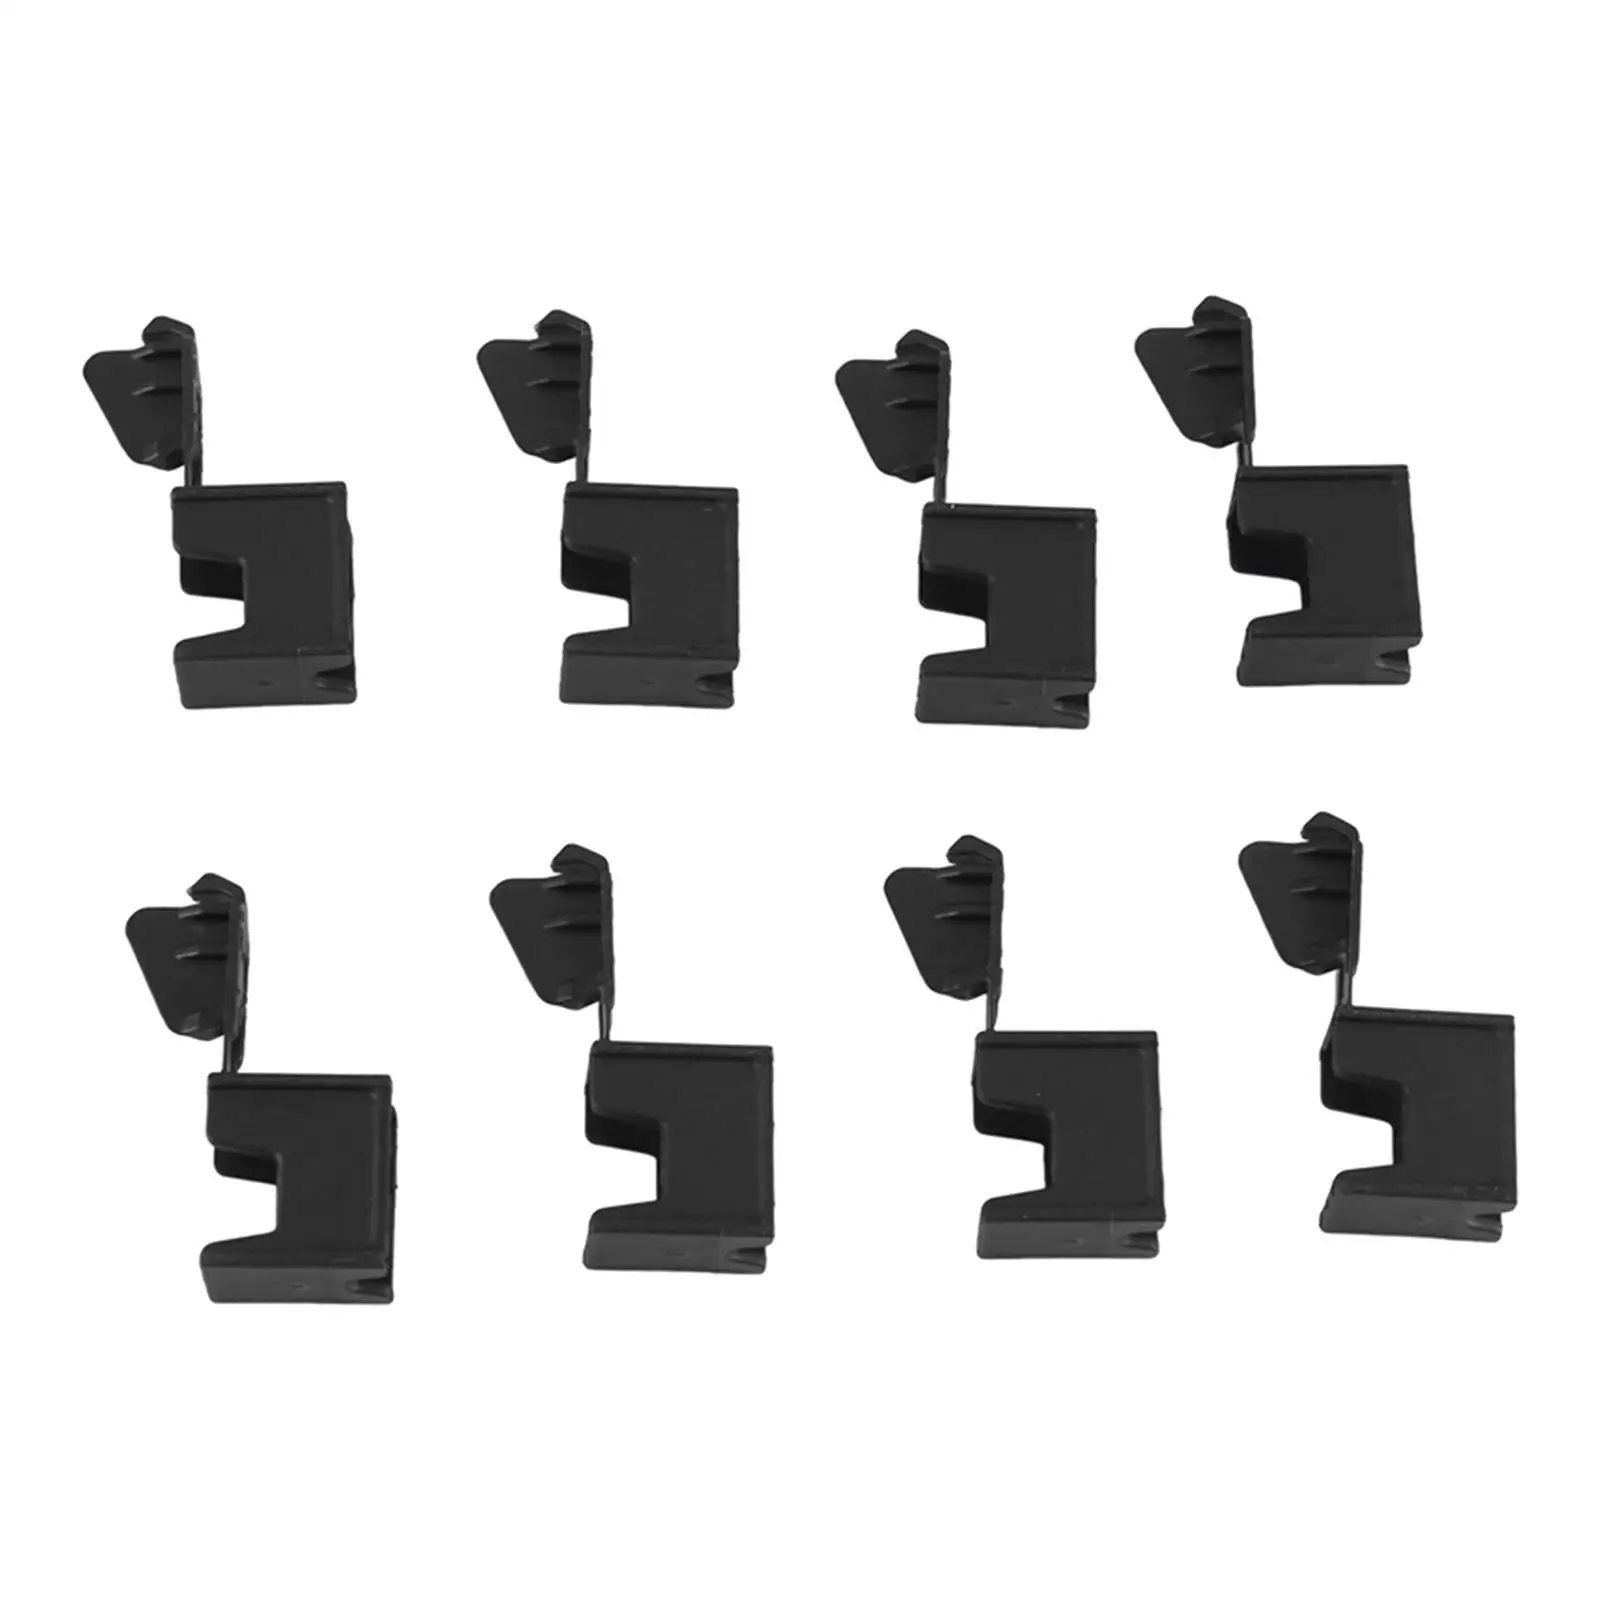 8Pcs Convertible Roof Top Hinge Cover Clips 54377187747 Vehicle Premium Spare Parts Roof Rail Mounting Kit for BMW E93 F33